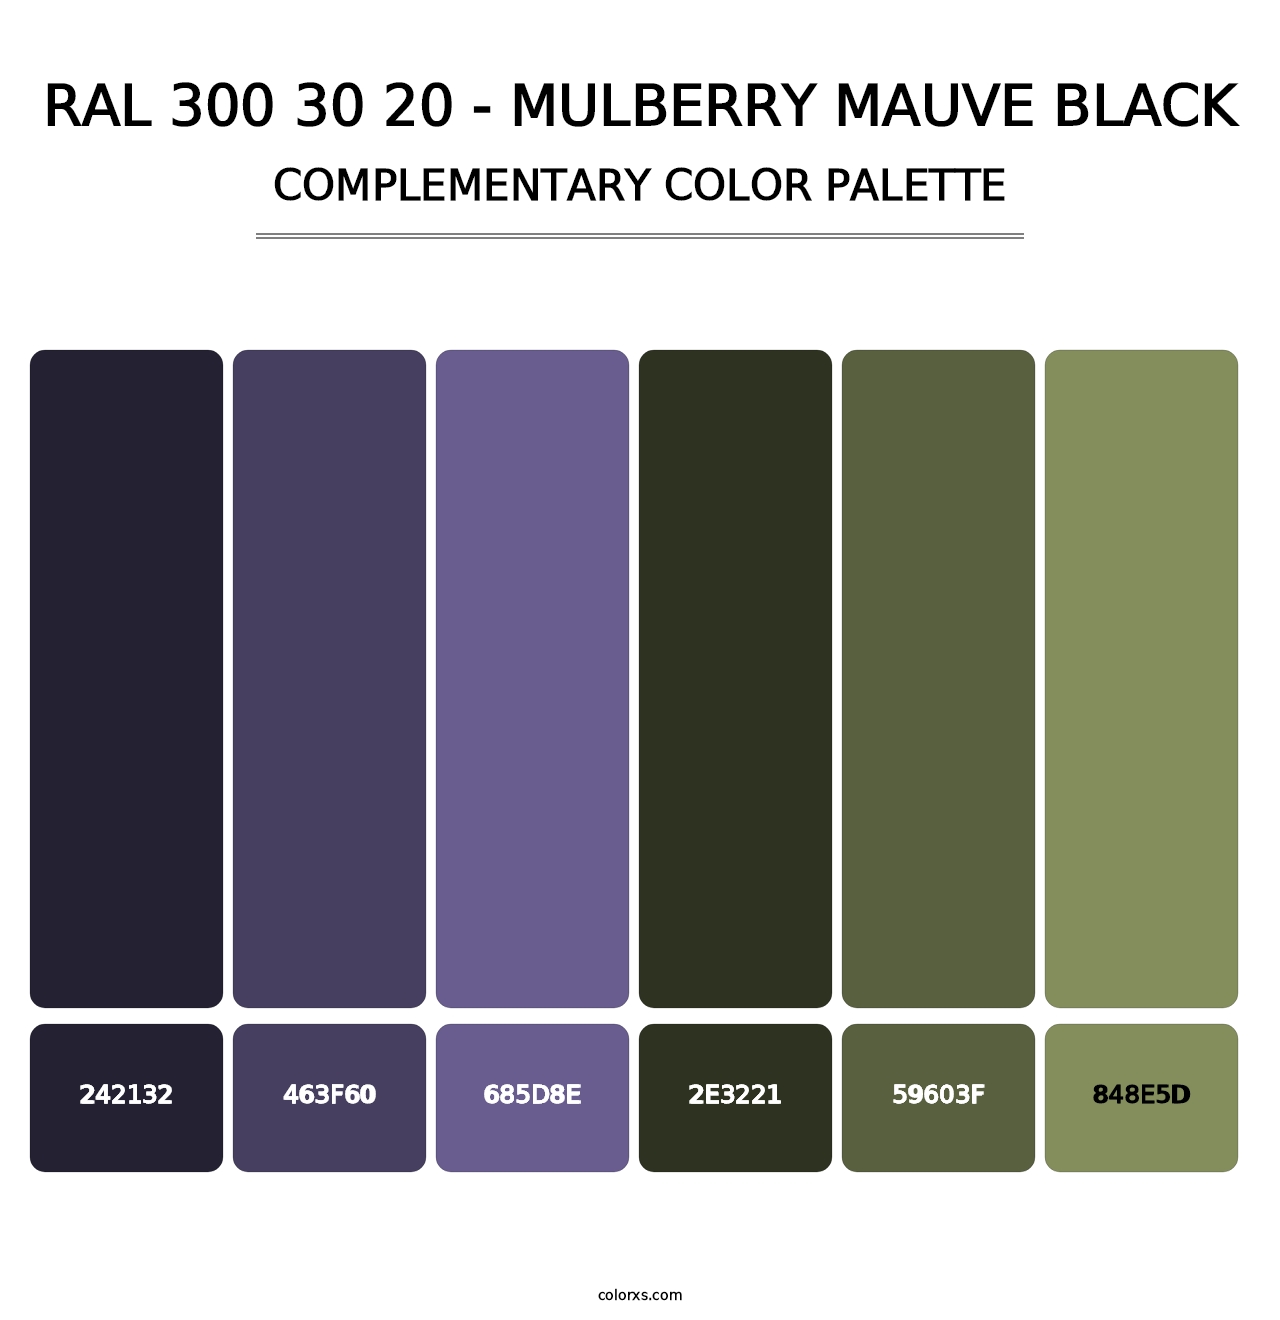 RAL 300 30 20 - Mulberry Mauve Black - Complementary Color Palette